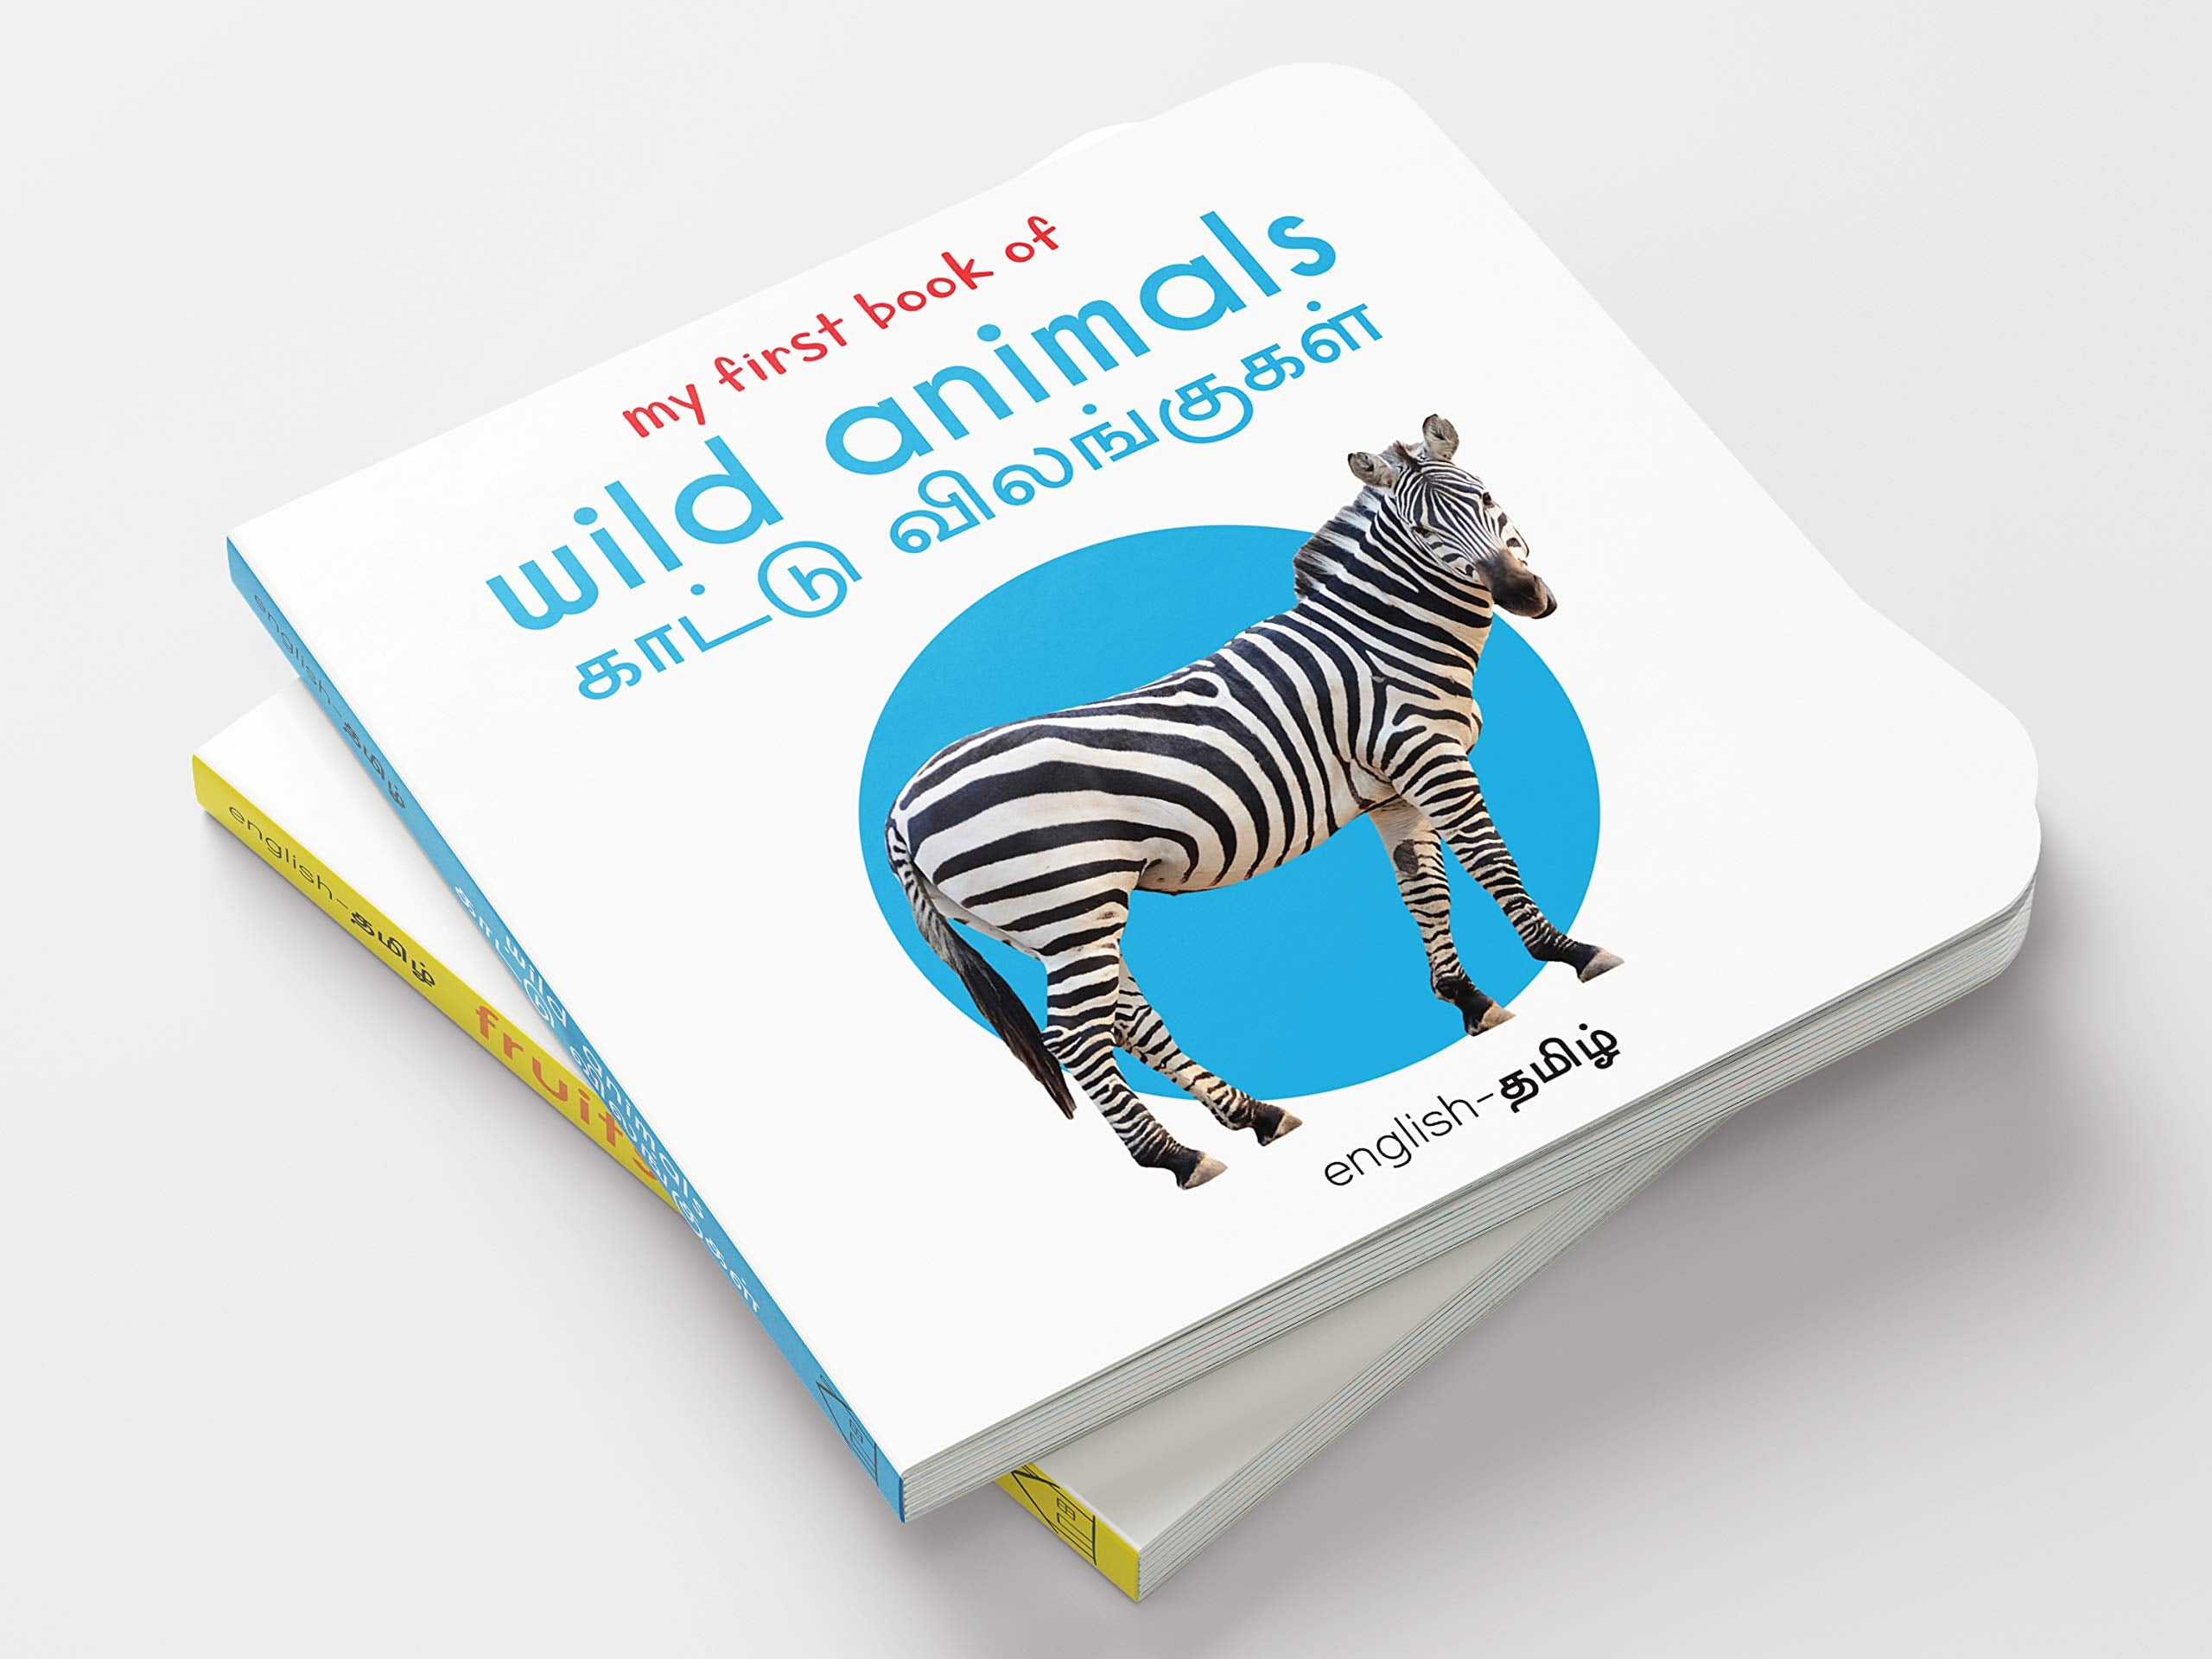 My First Book of Wild Animals - Kaatu Vilangugal: My First English - Tamil Board Book (English and Tamil Edition)